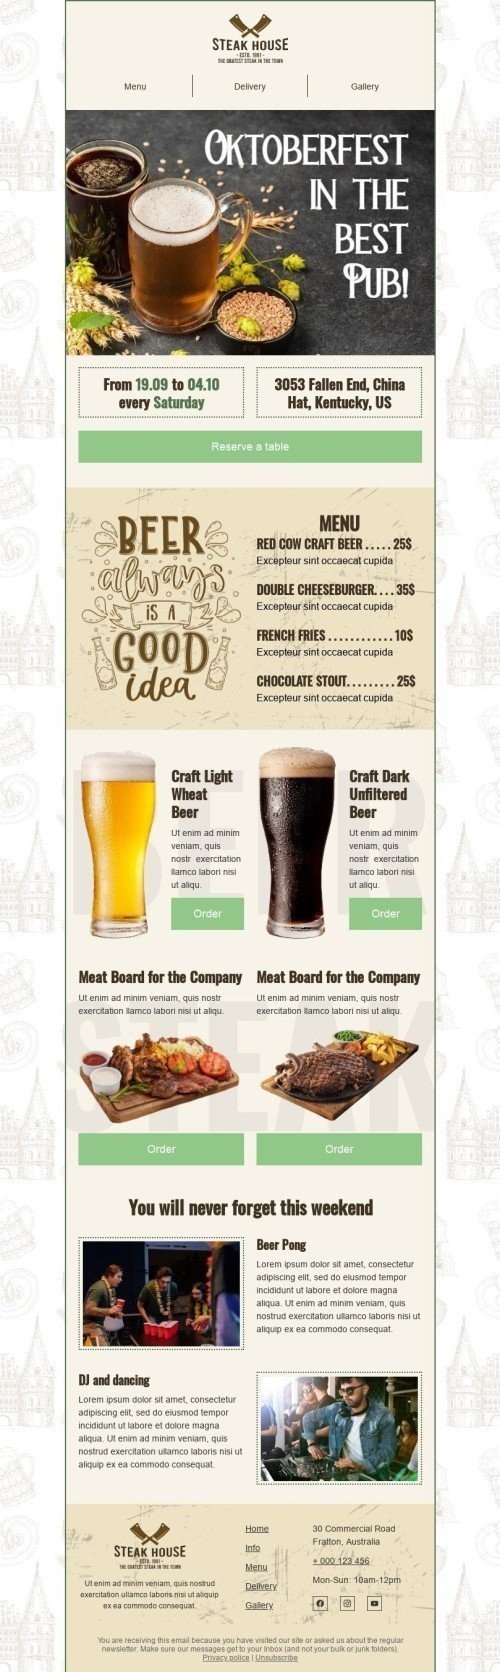 Oktoberfest Email Template «Steak house» for Food industry mobile view